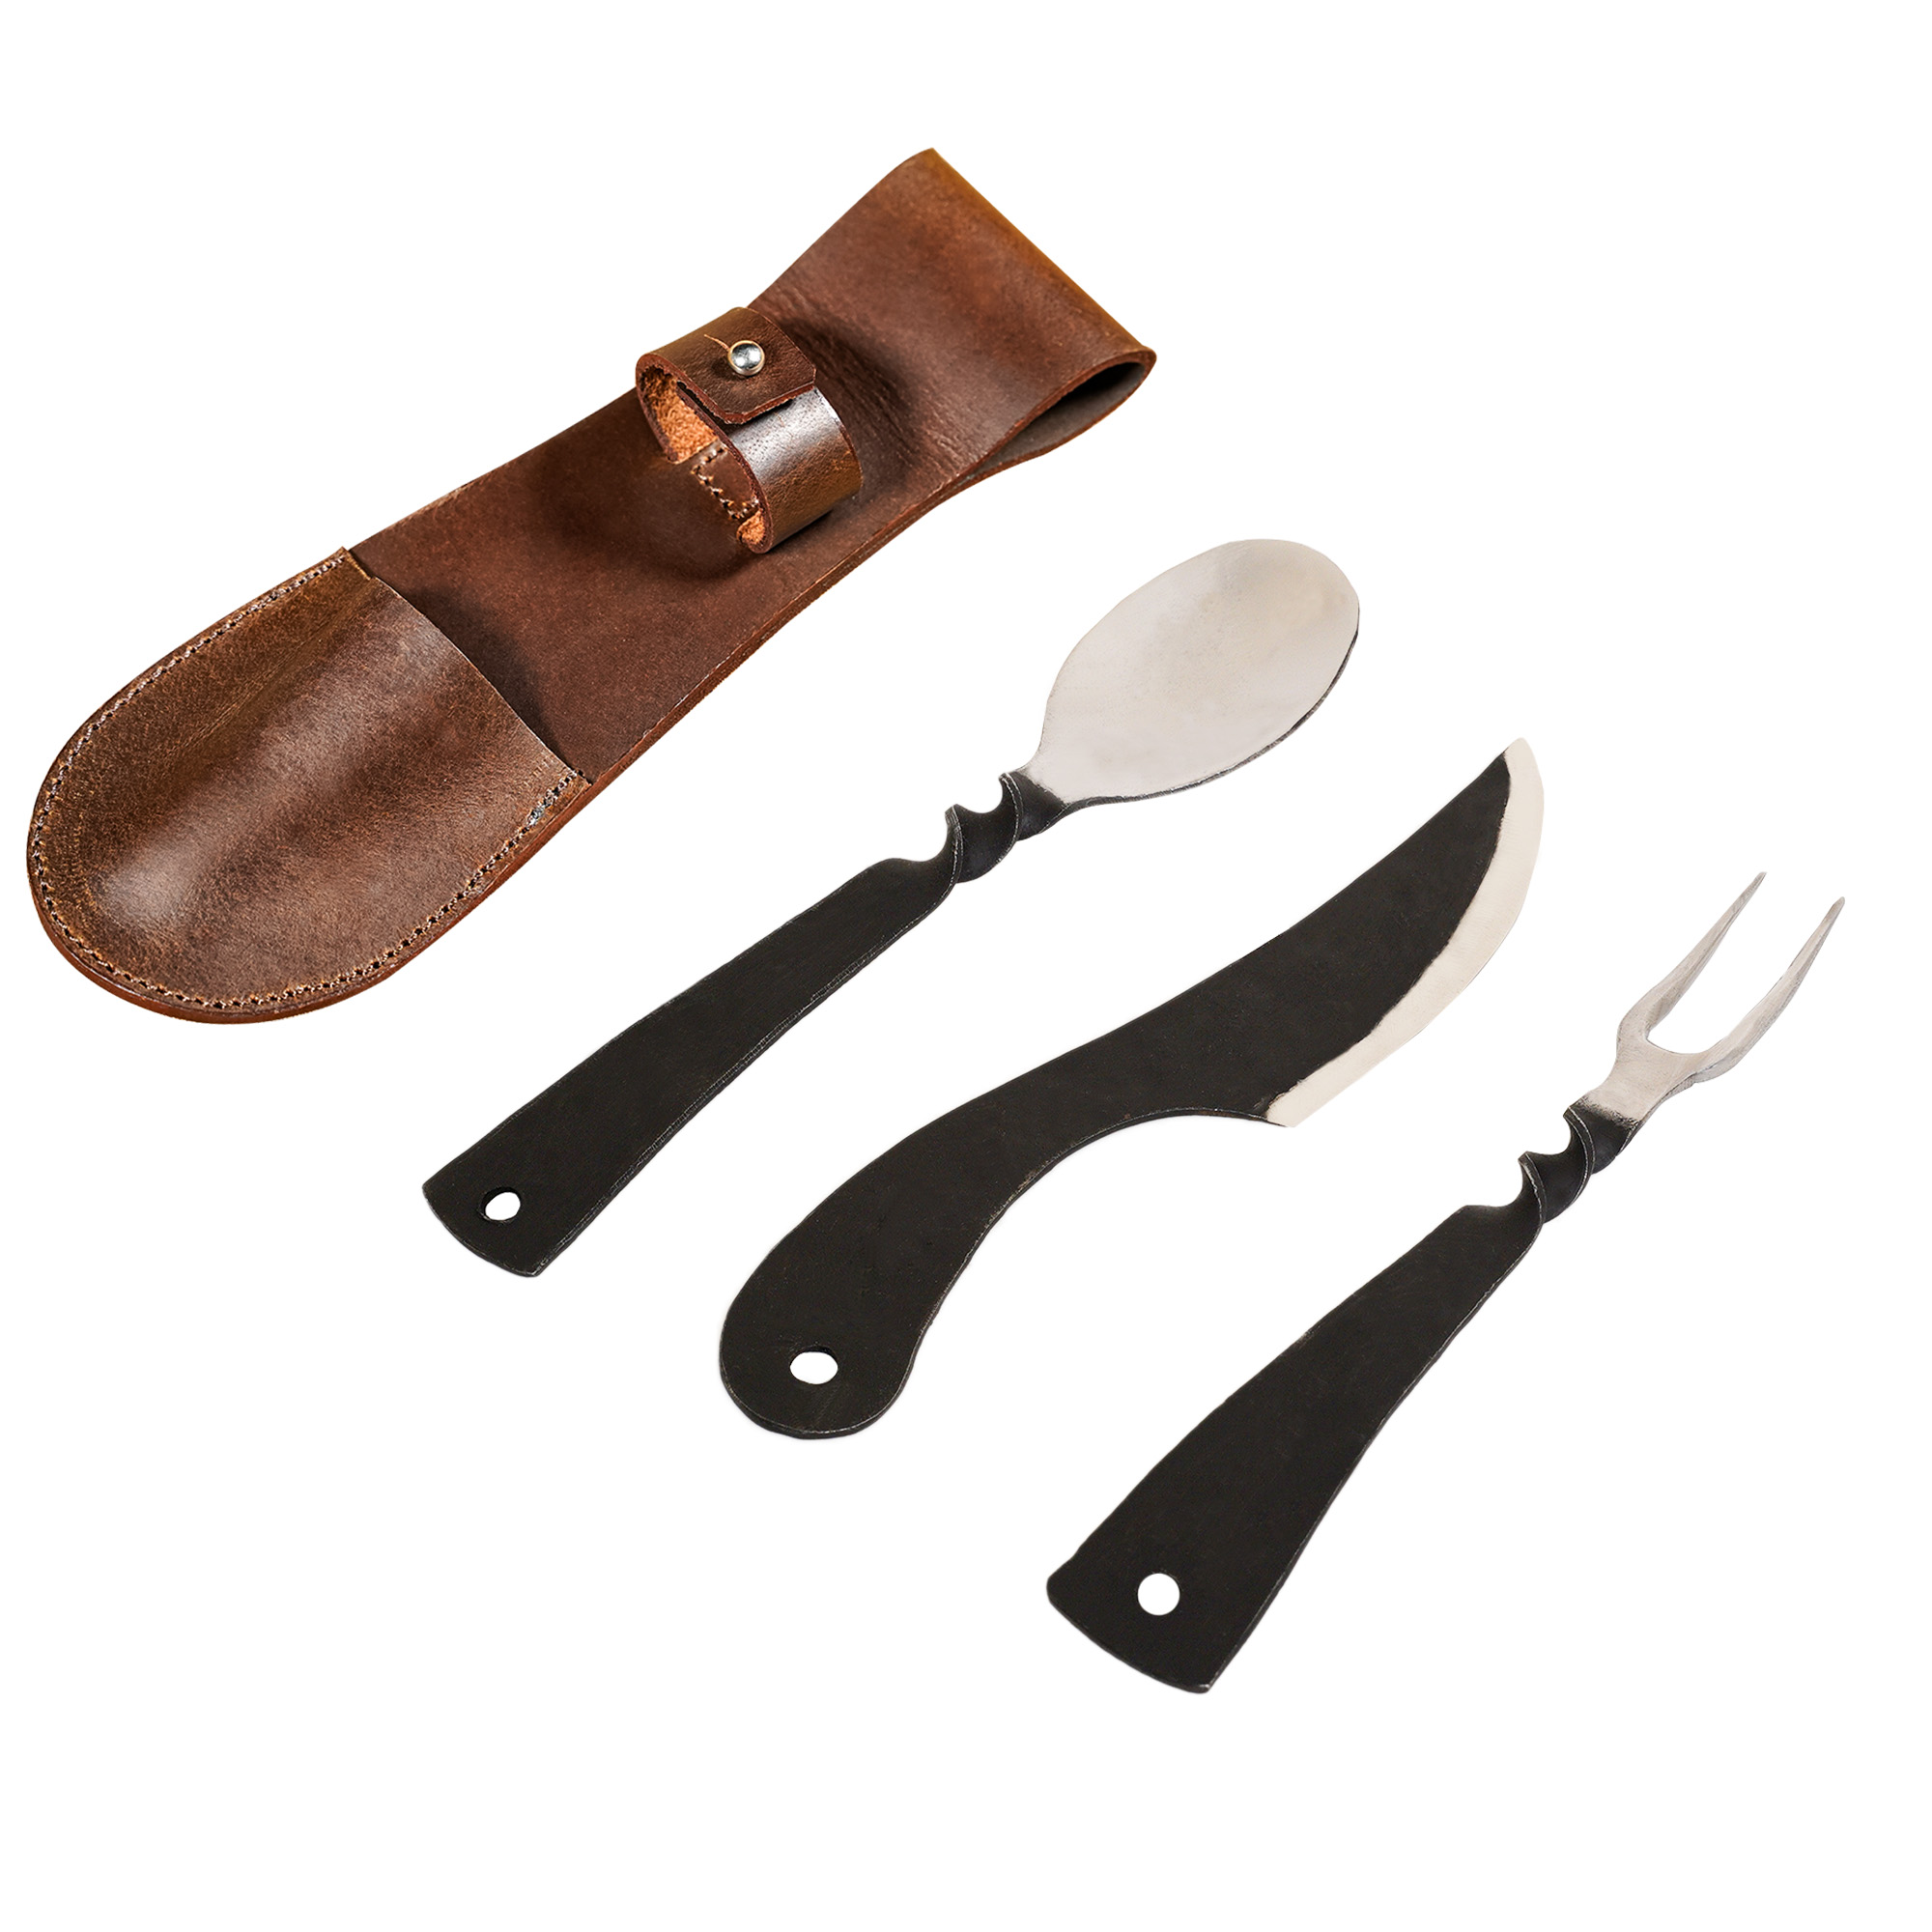 ✨ Rustic Viking Cutlery Set Hand Crafted Stainless Steel Accessory -  Medieval Shop at Lord of Battles